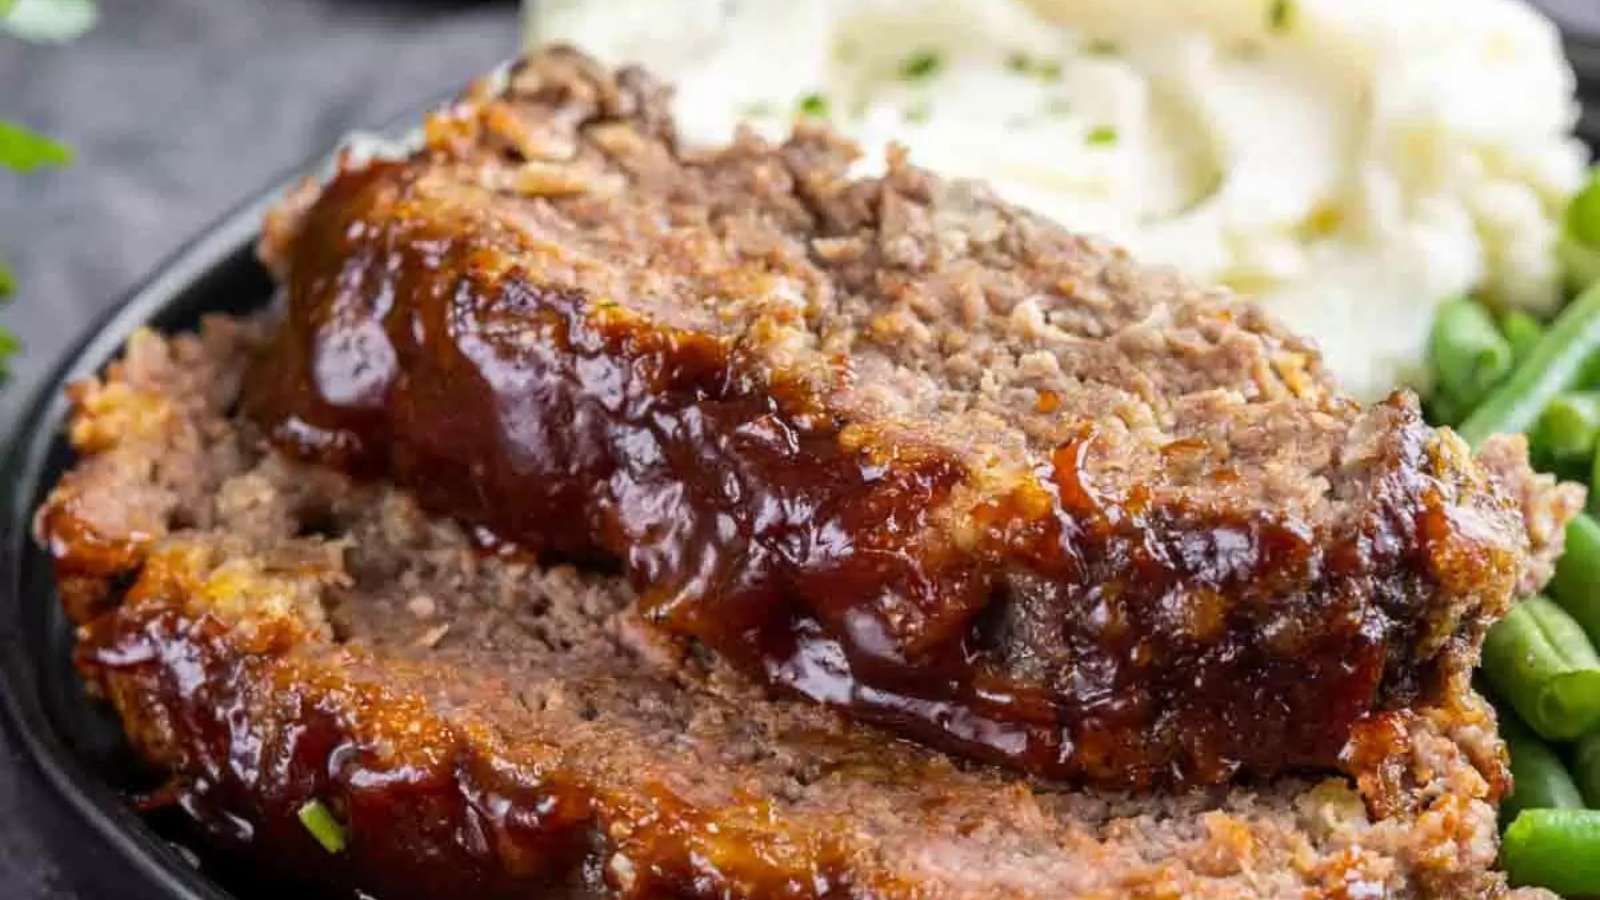 Meatloaf on a plate with green beans and mashed potatoes.